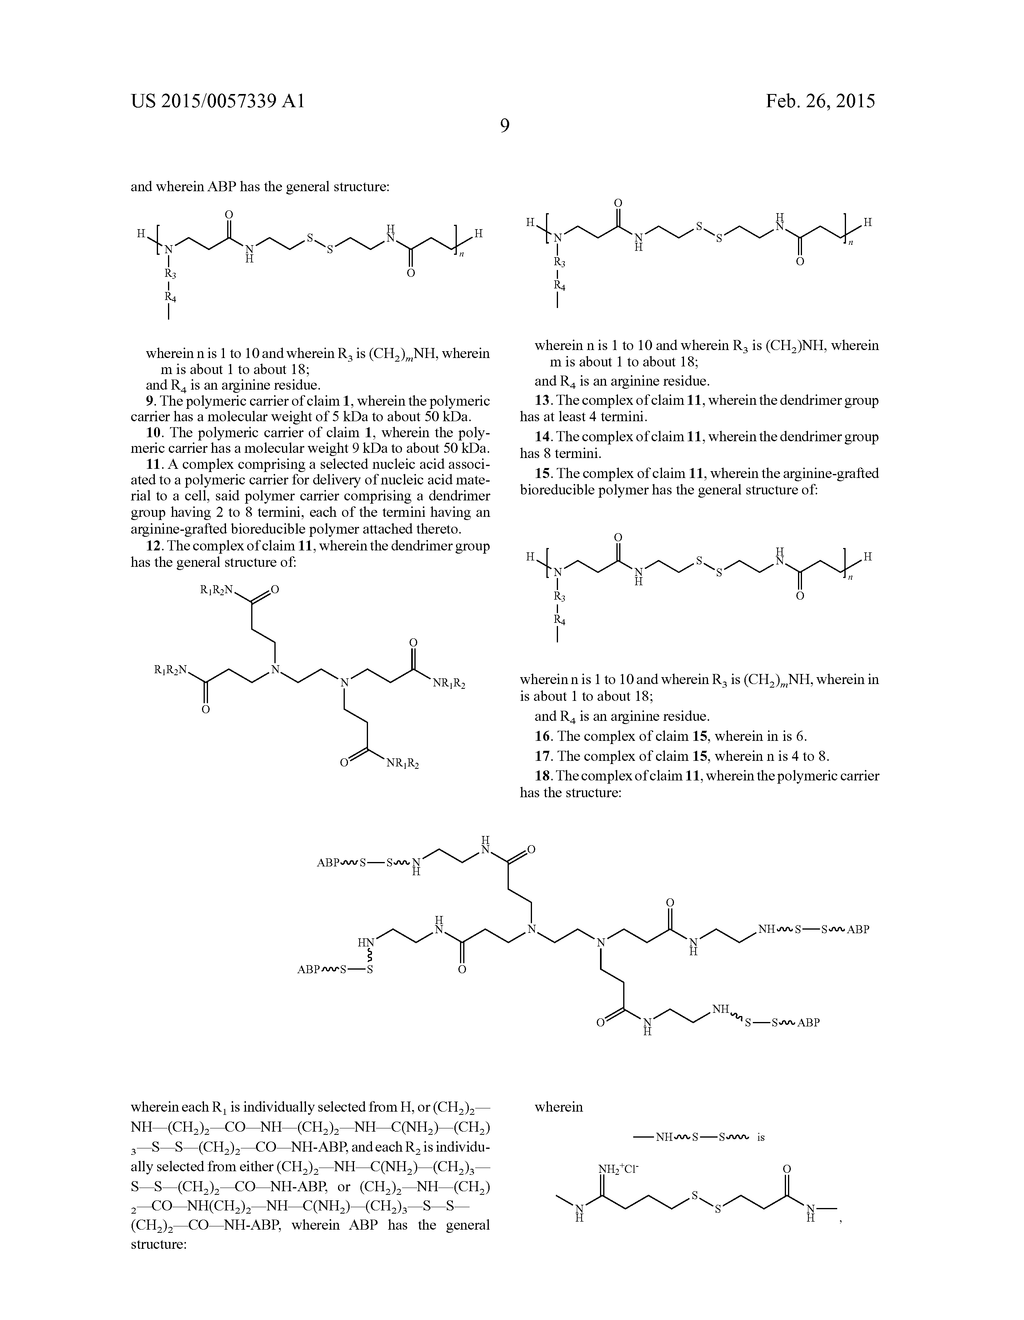 HIGH MOLECULAR WEIGHT ARGININE-GRAFTED BIOREDUCIBLE POLYMERS - diagram, schematic, and image 22